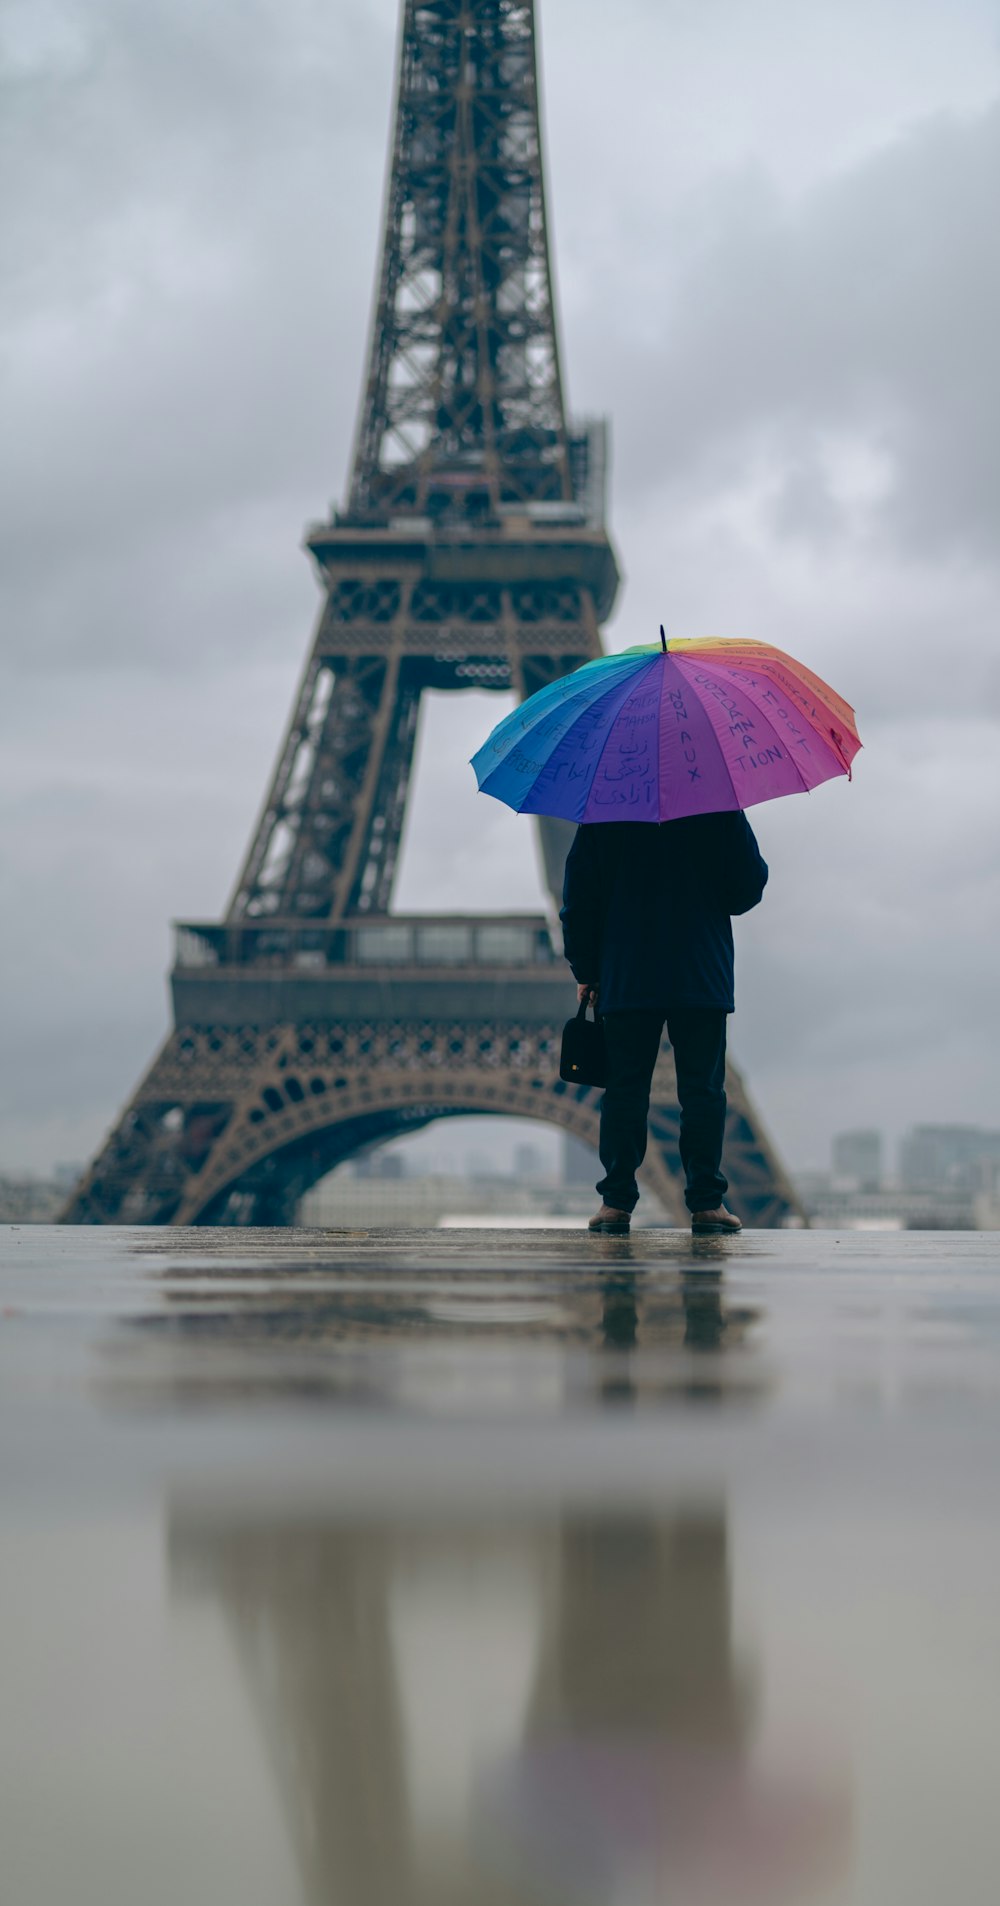 a person holding an umbrella in front of the eiffel tower